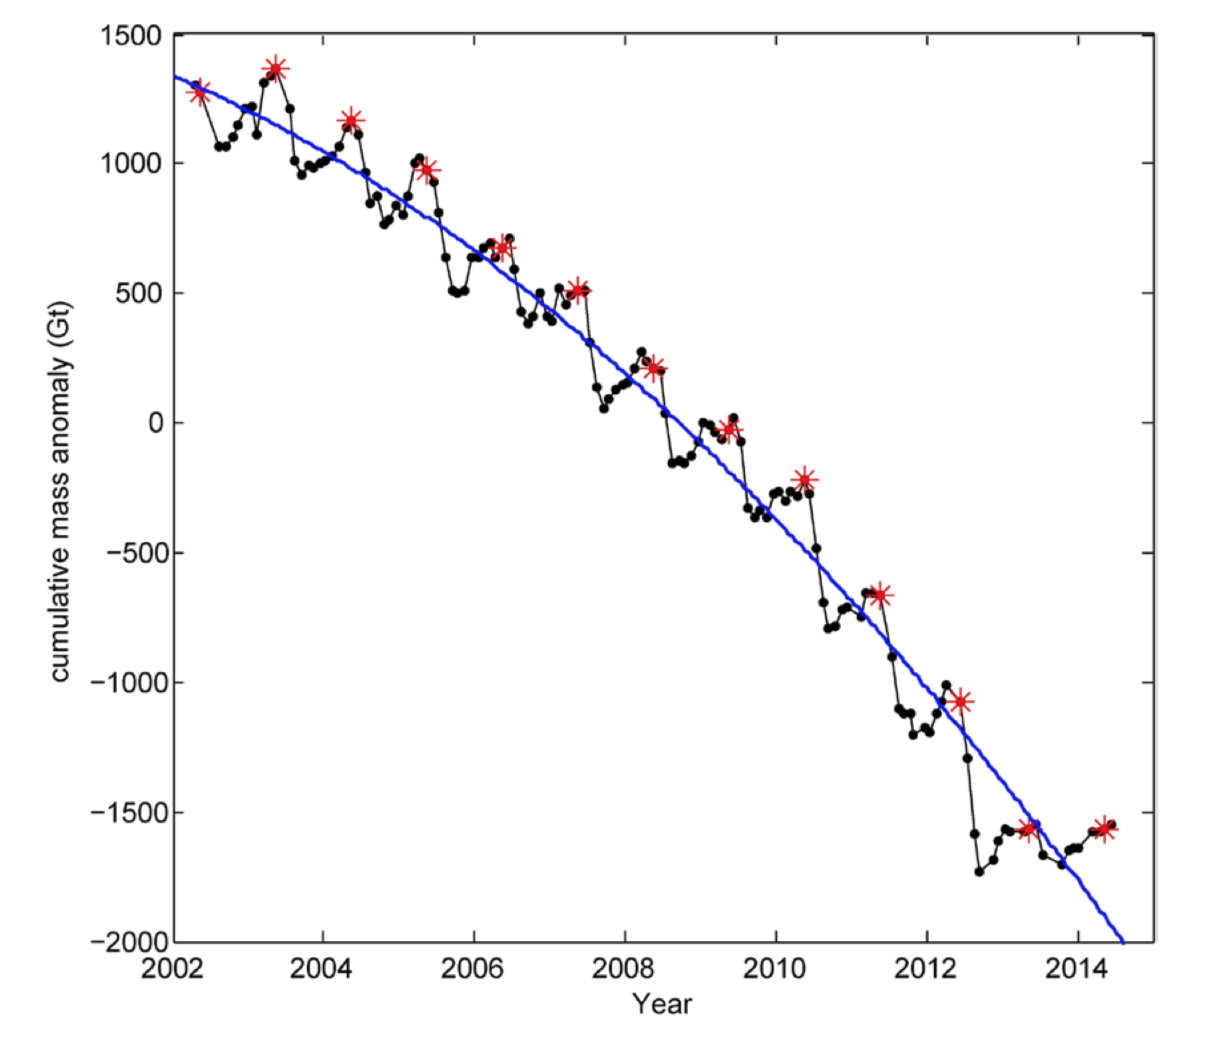 Graph representing the forming and melting of ice on Greenland, 2002 to 2014